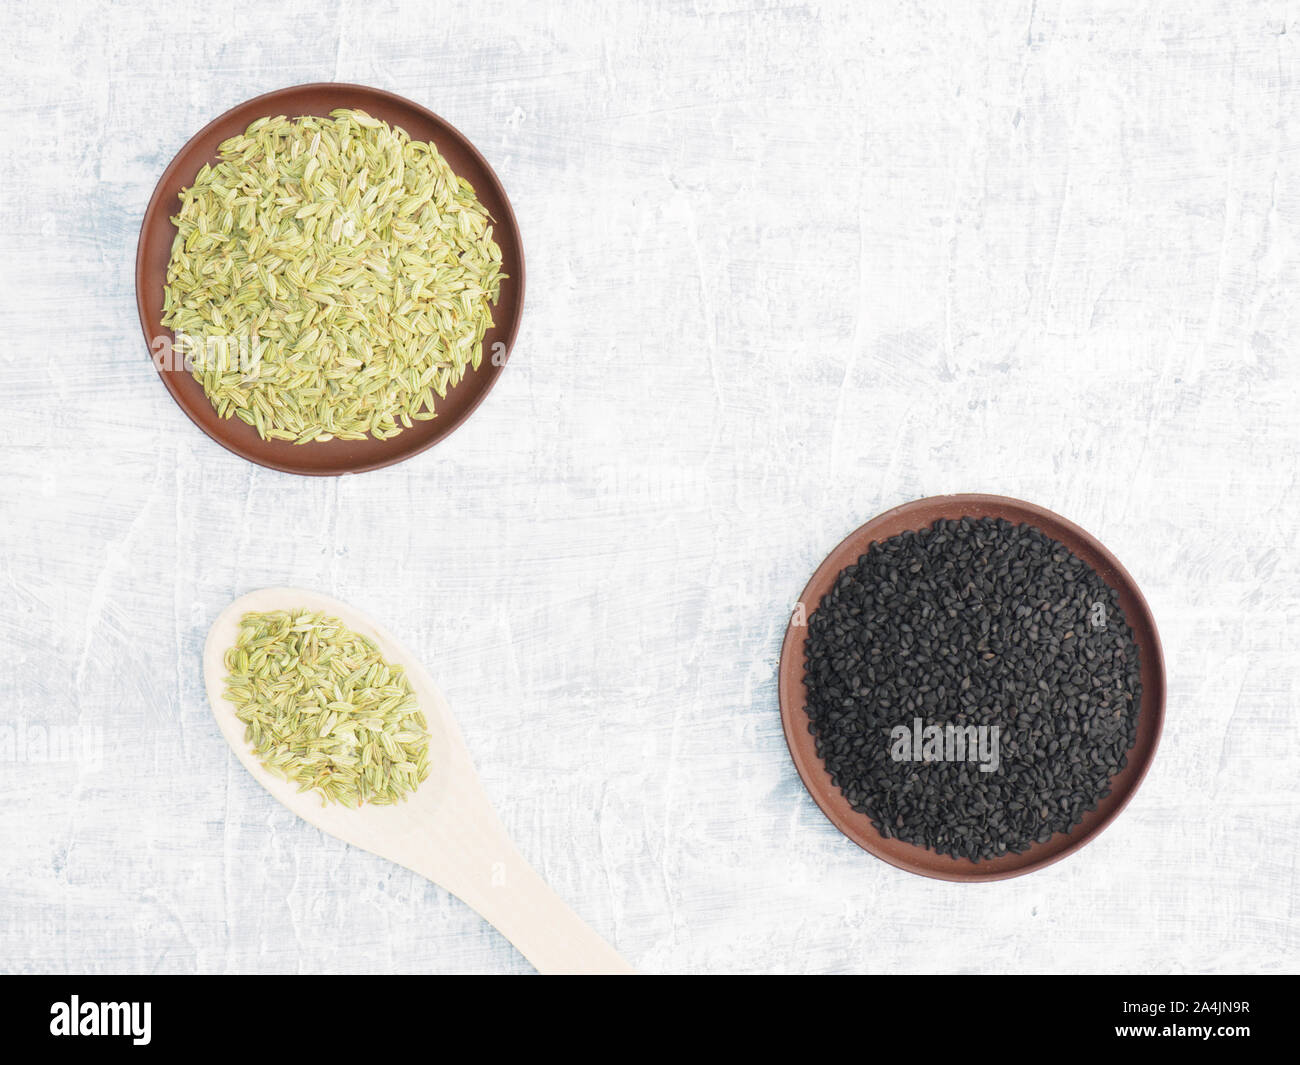 Spices and herbs set on concrete background in clay plate and spoon. Black cumin and fennel. Modern apothecary, naturopathy and ayurveda concept. Stock Photo